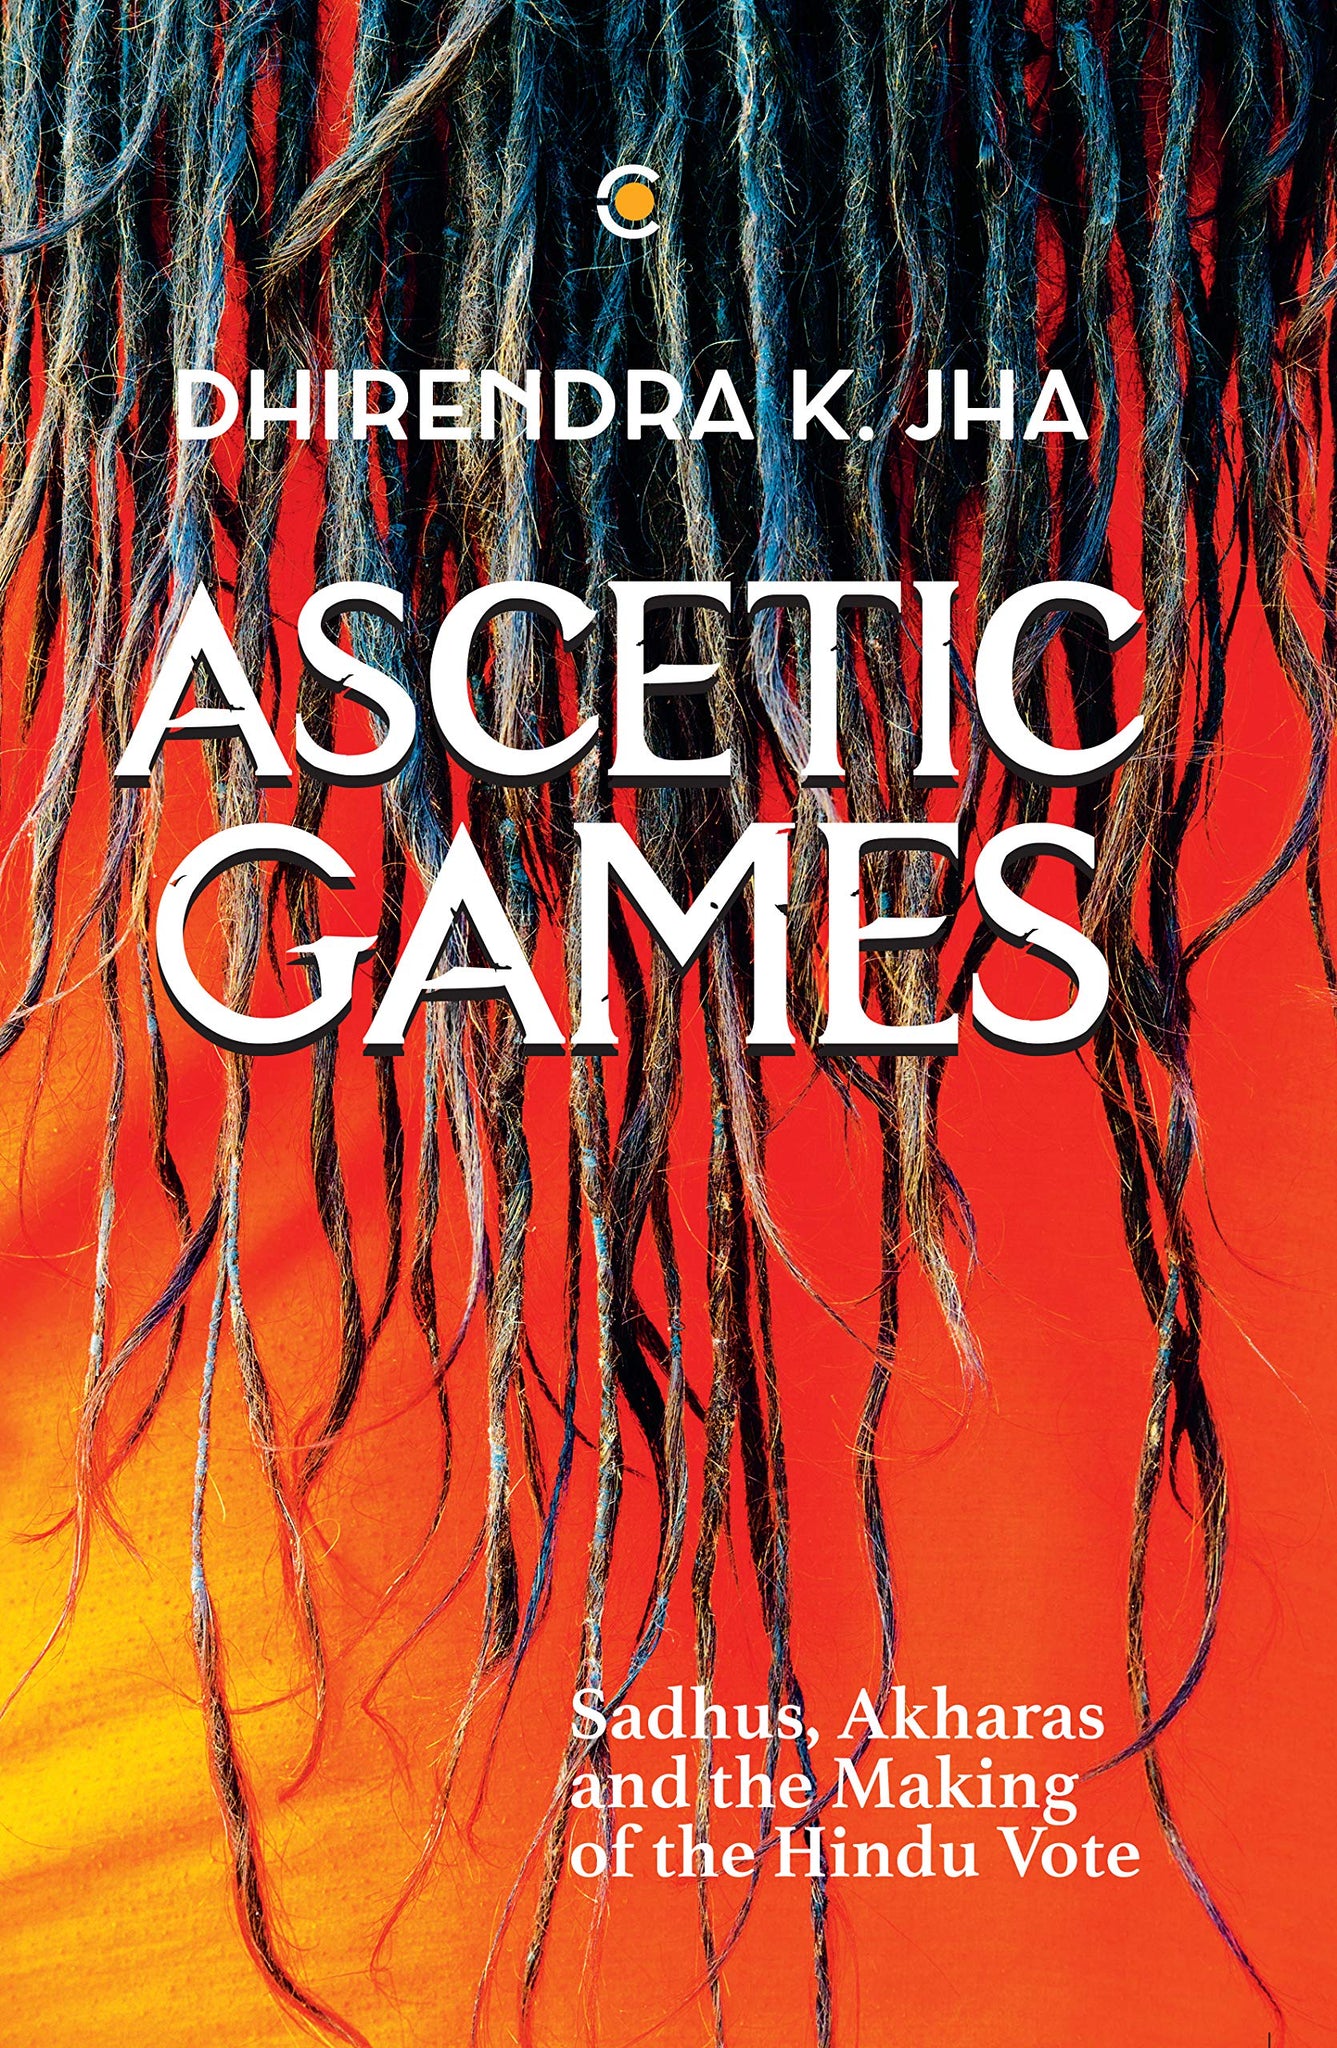 Ascetic Games: Sadhus, Akharas And The Making Of The Hindu Vote